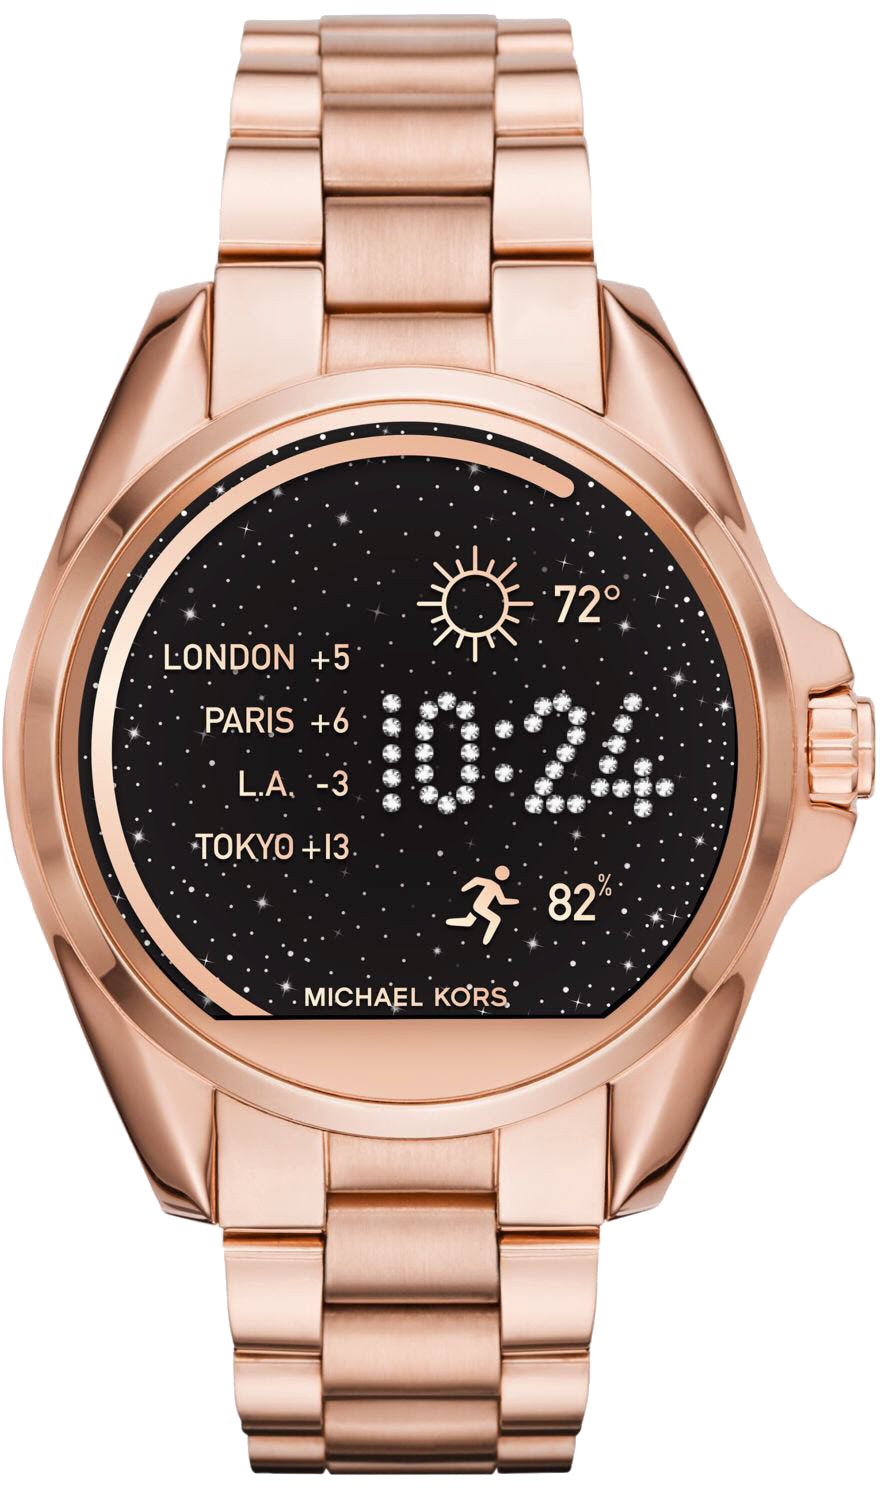 Michael Kors Cooper Rosegold watch and bracelet  Rose gold watches Michael  kors cooper Michael kors